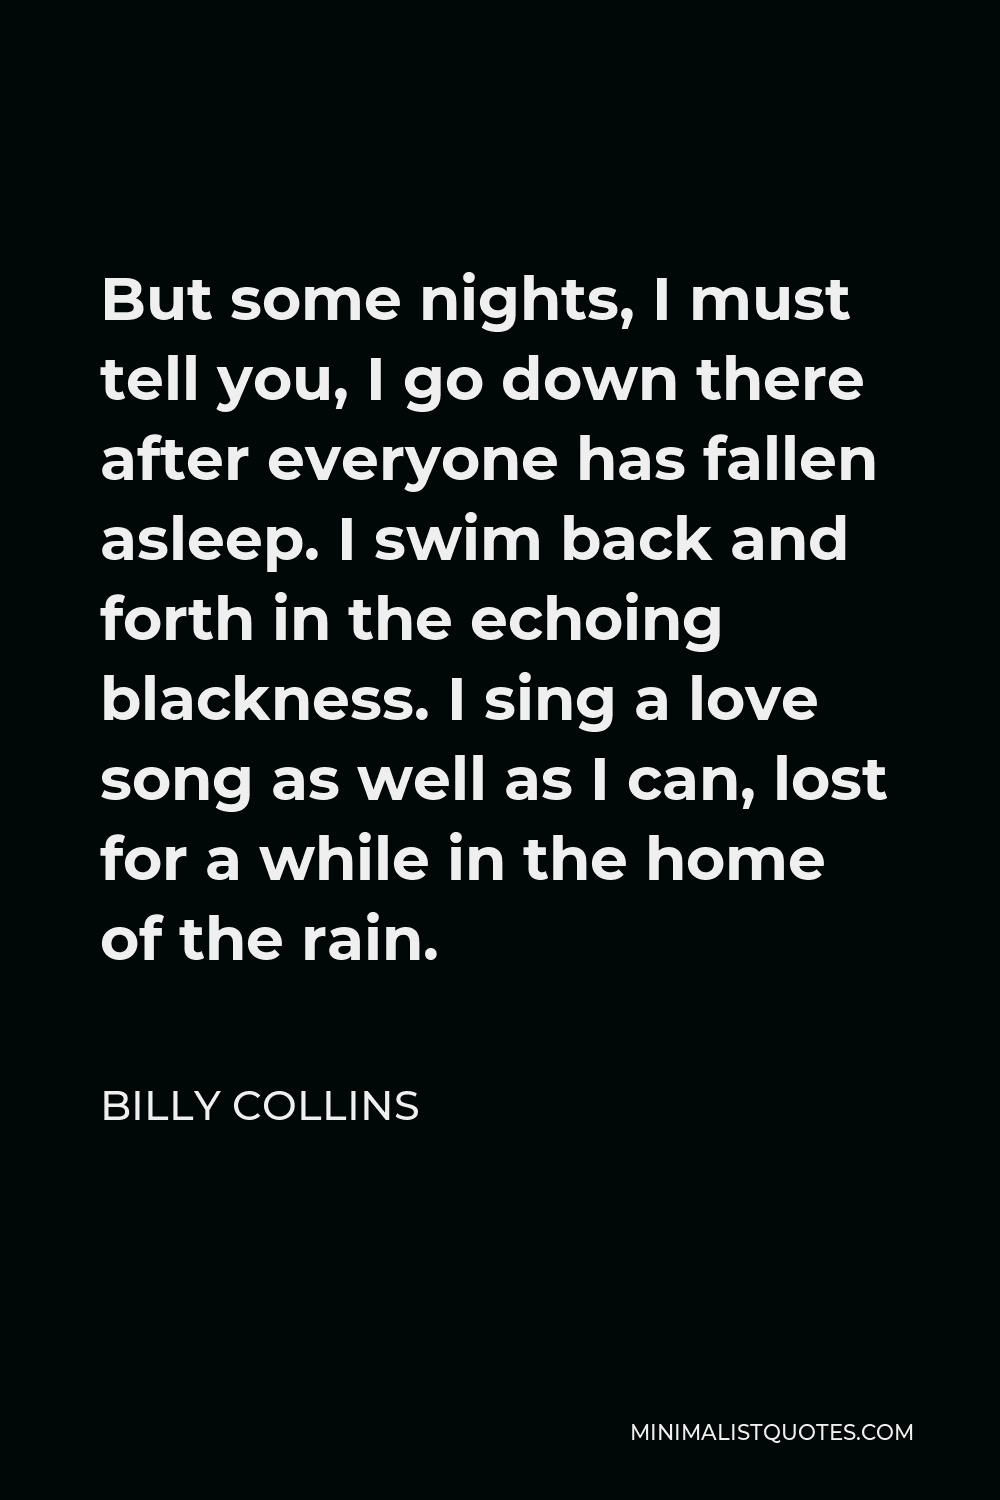 Billy Collins Quote - But some nights, I must tell you, I go down there after everyone has fallen asleep. I swim back and forth in the echoing blackness. I sing a love song as well as I can, lost for a while in the home of the rain.